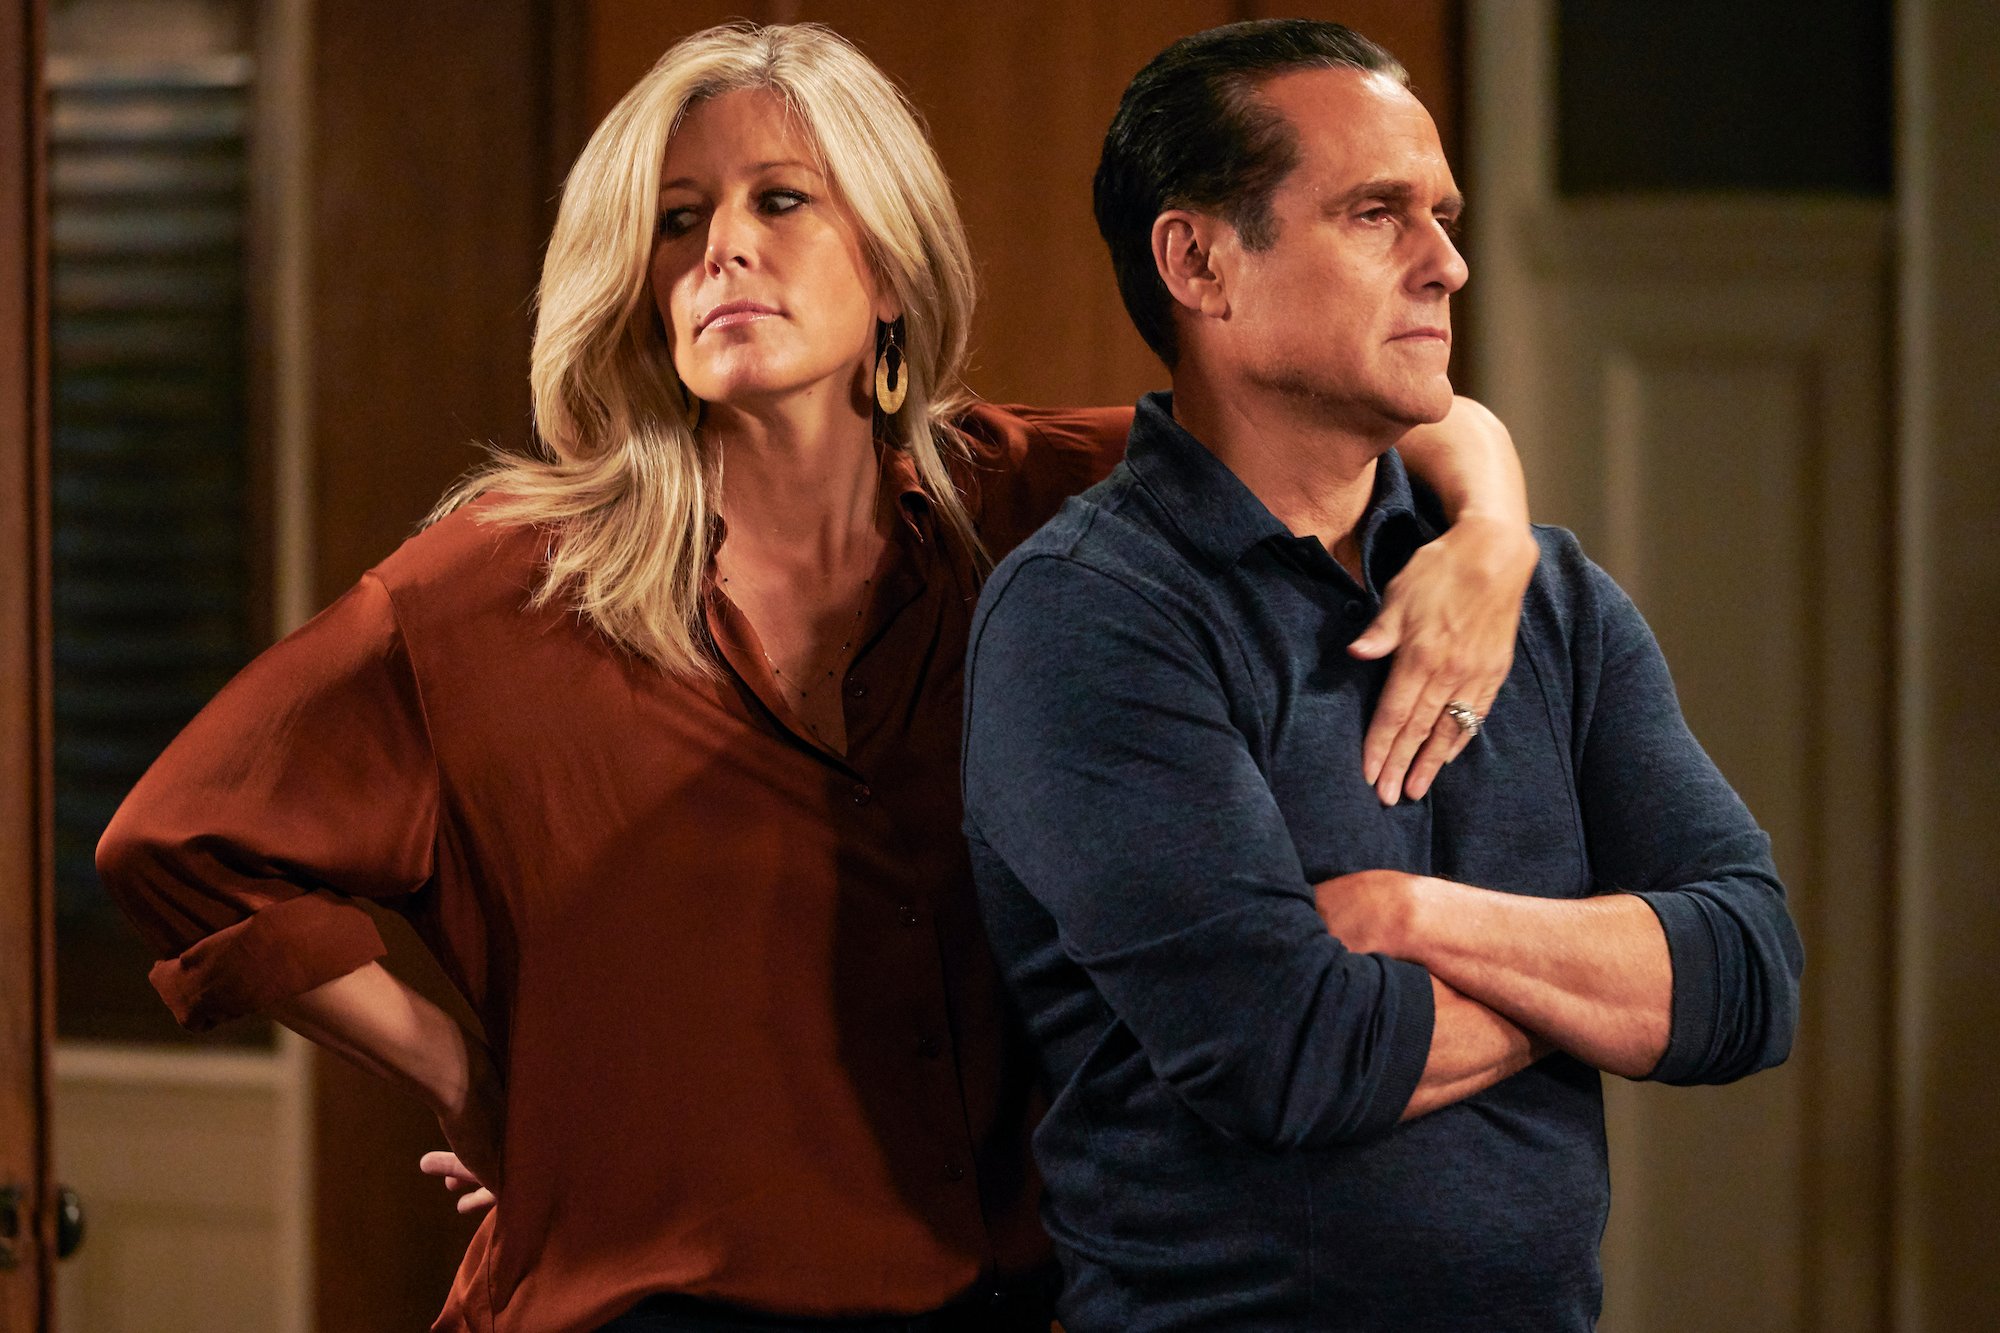 Laura Wright as Carly Corinthos and Maurice Benard as Sonny Corinthos on 'General Hospital'